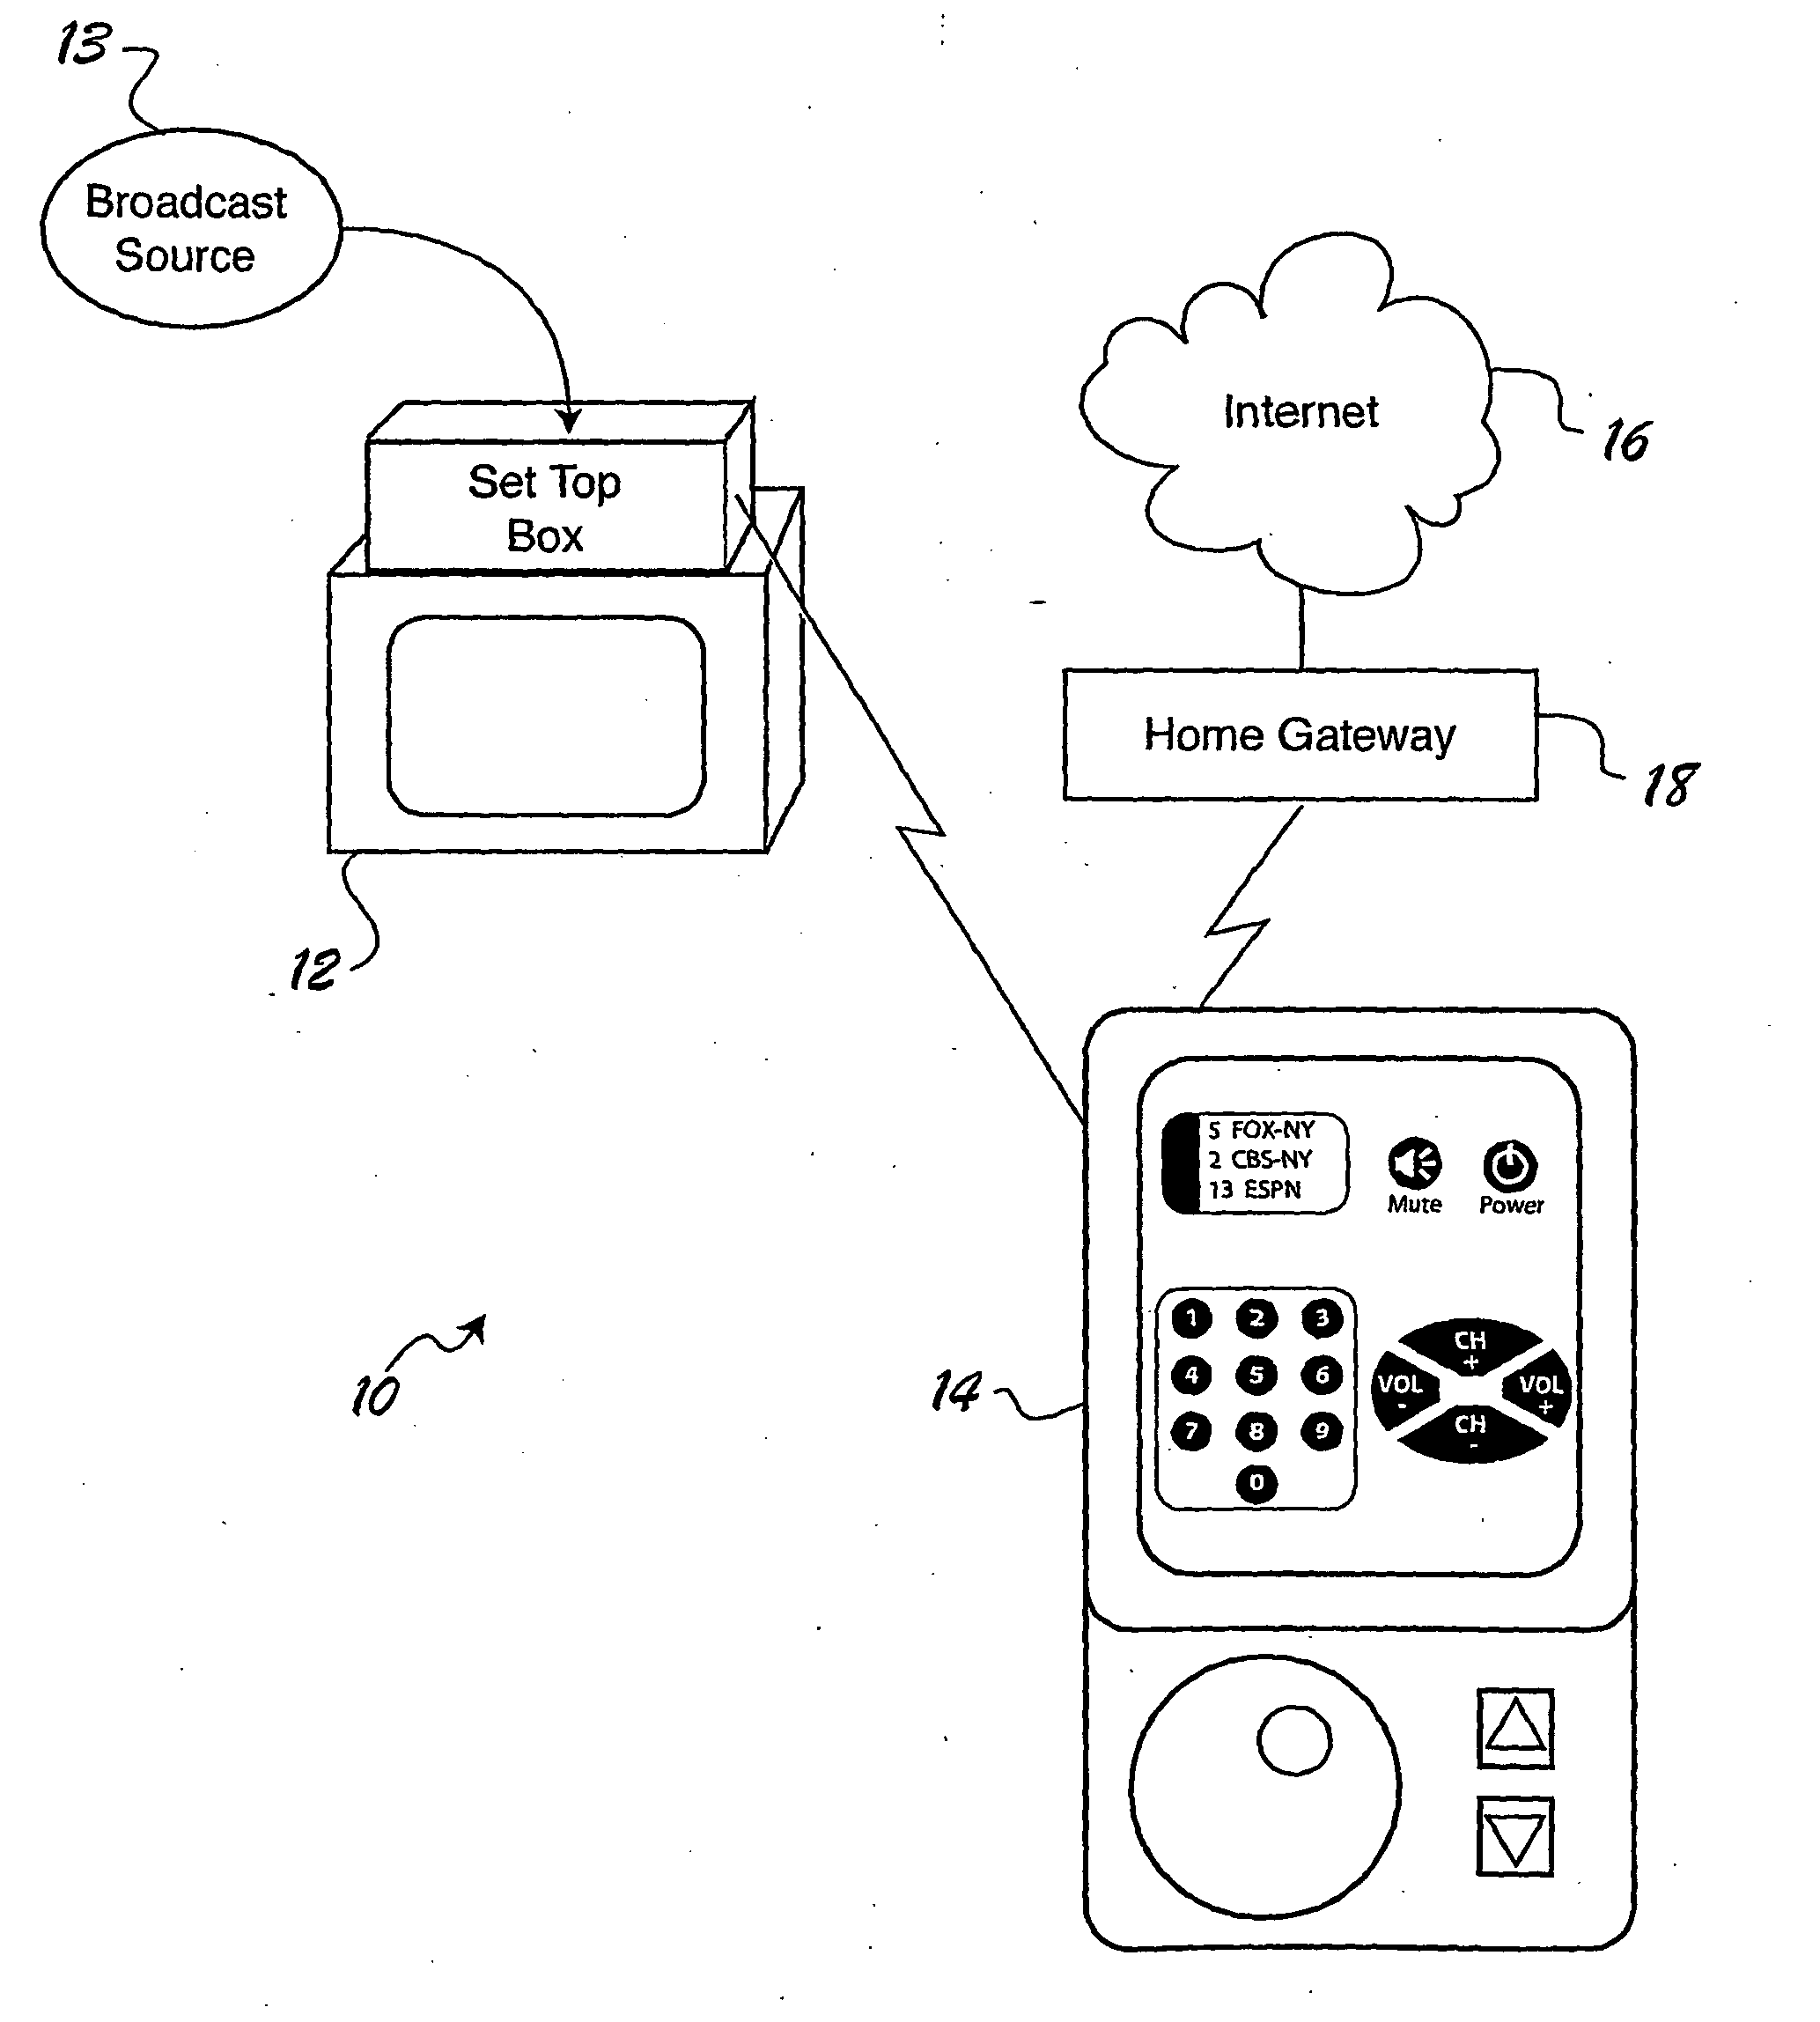 Asynchronous integration of portable handheld device